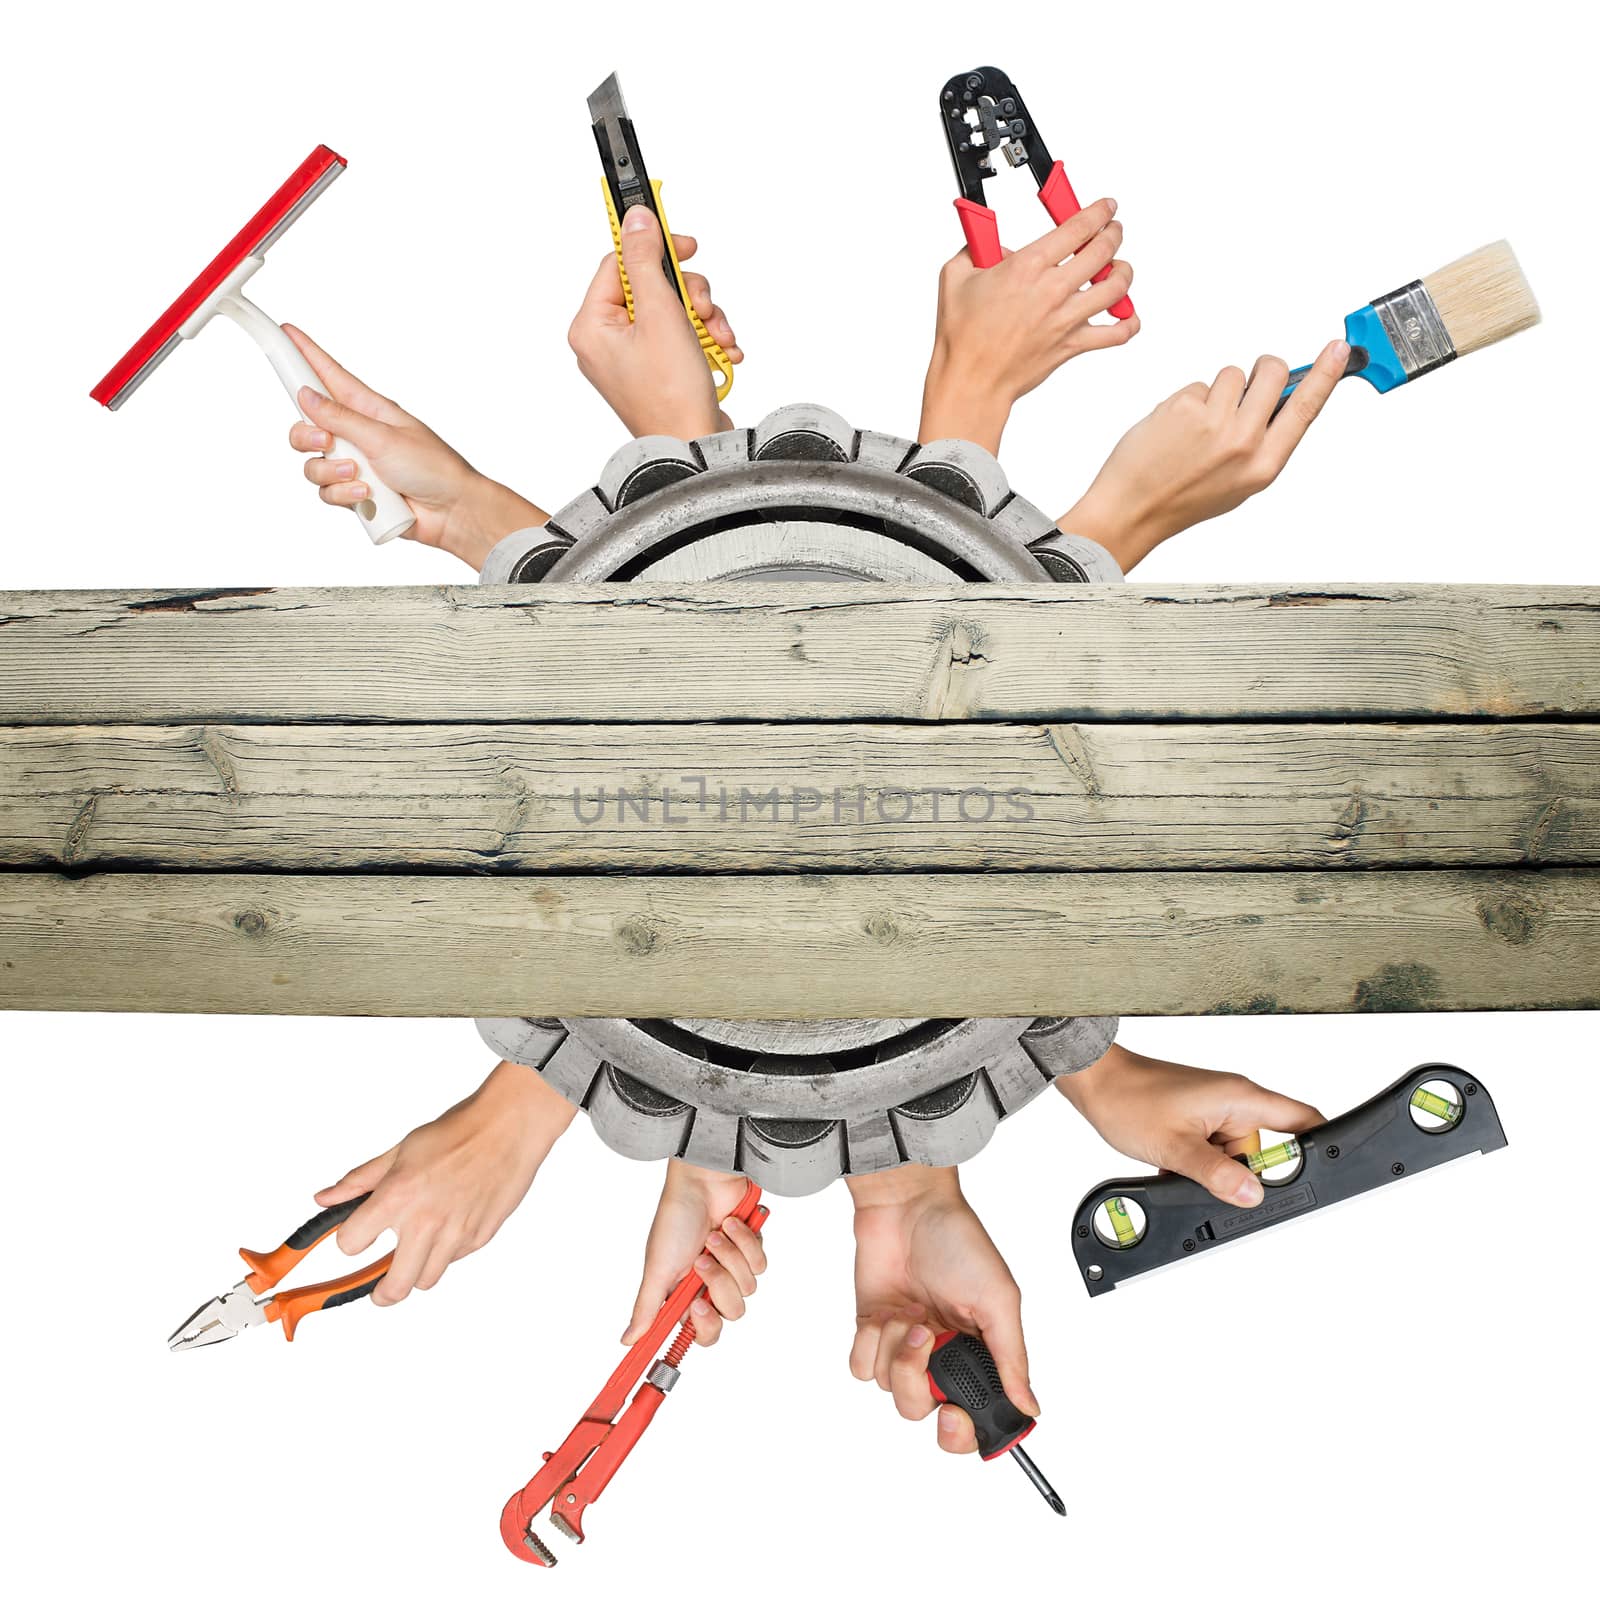 Peoples hands holding tools on isolated white background